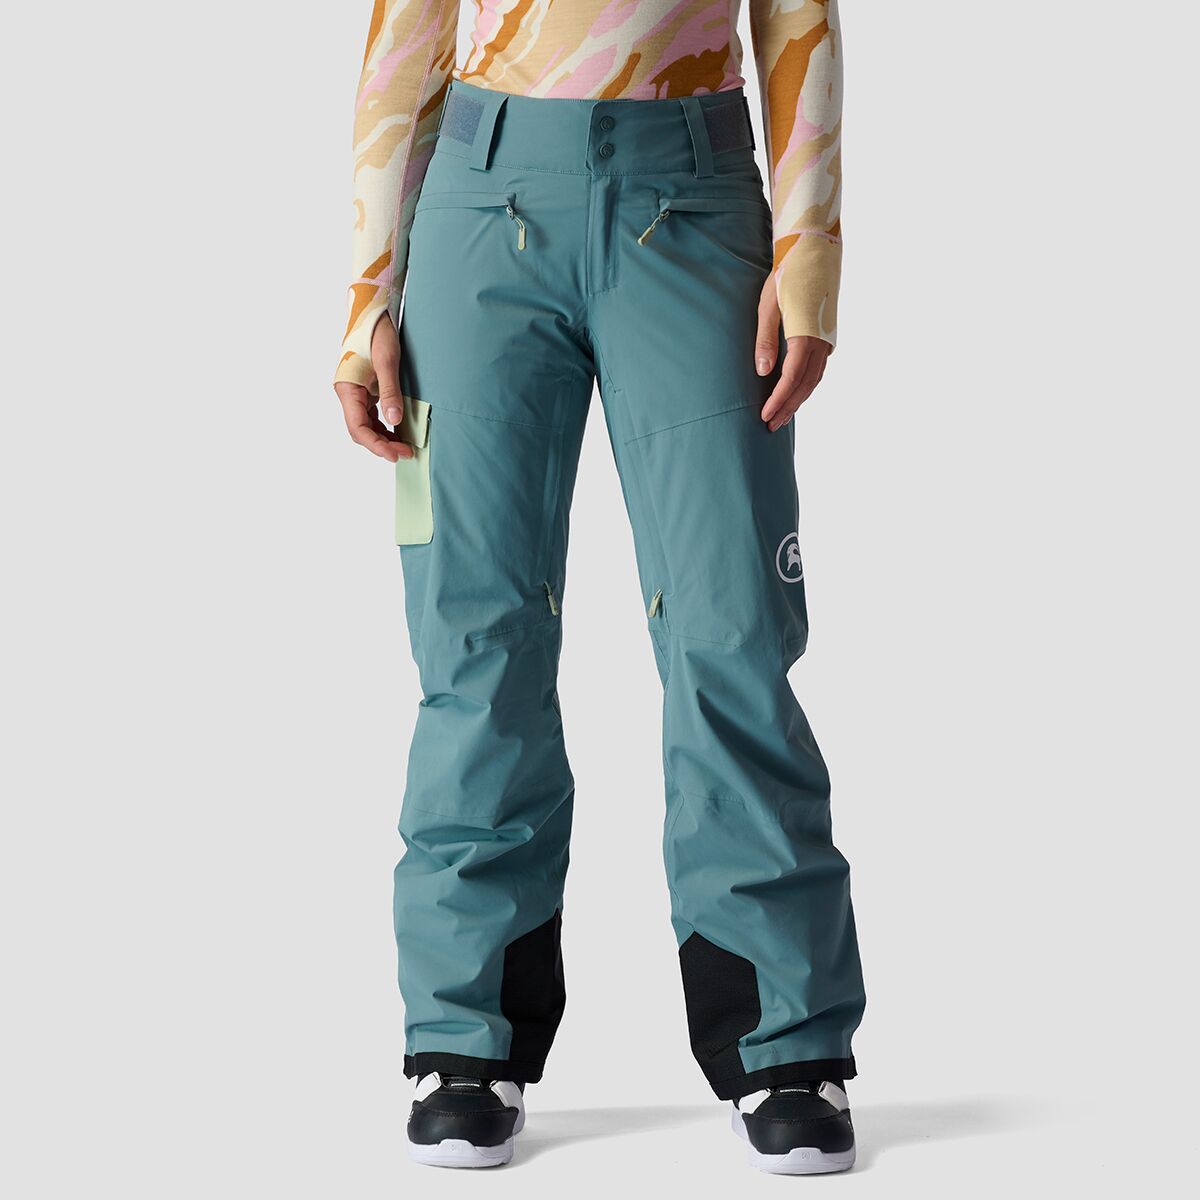 Backcountry Last Chair Stretch Insulated Pant - Women's